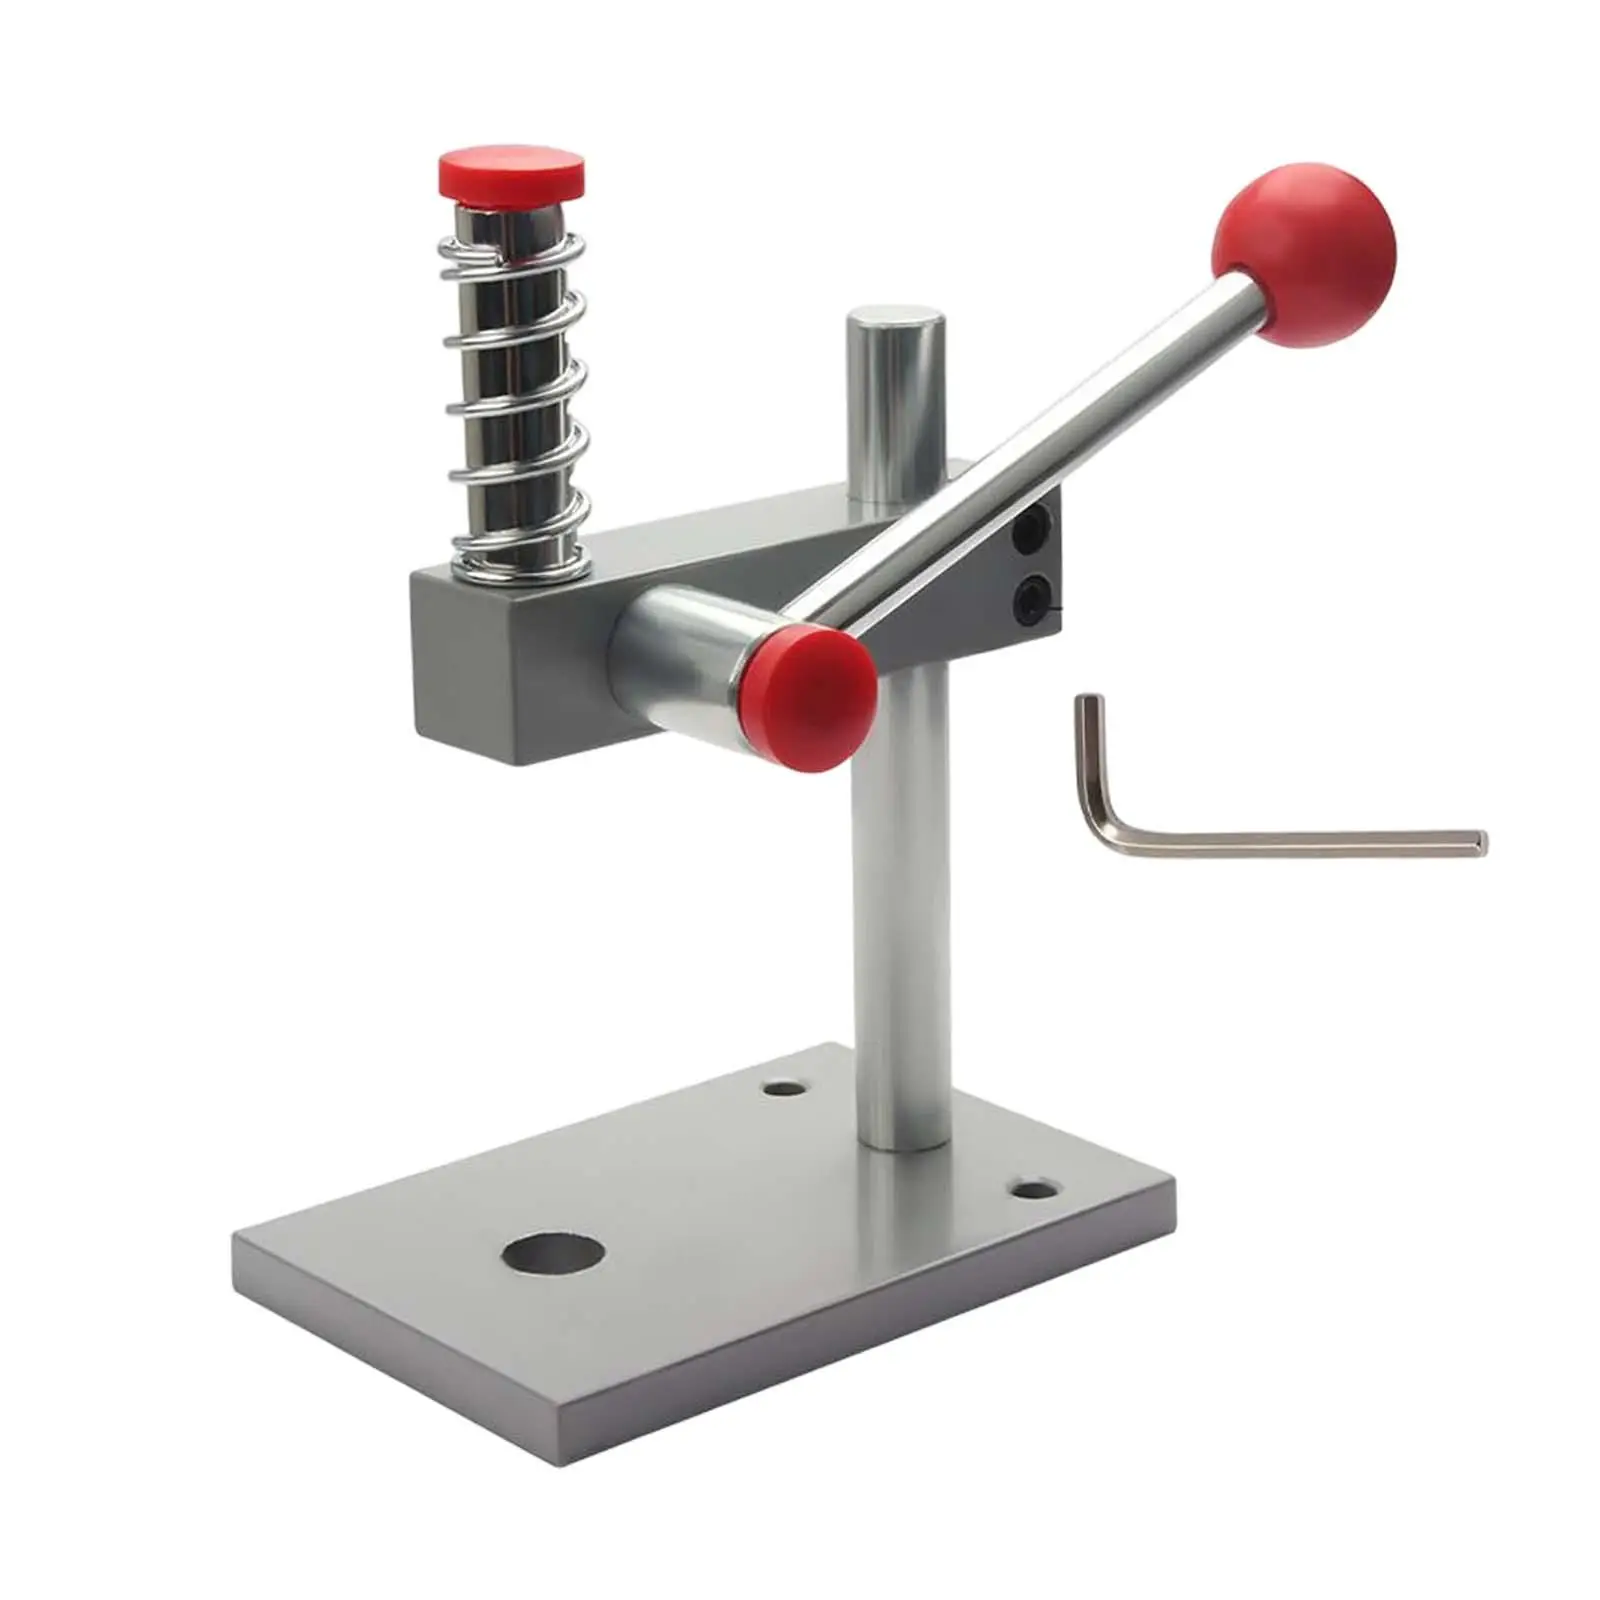 Button Maker Machine DIY Adjustable Height Easy to Operate Decorative Button Maker Making Tool